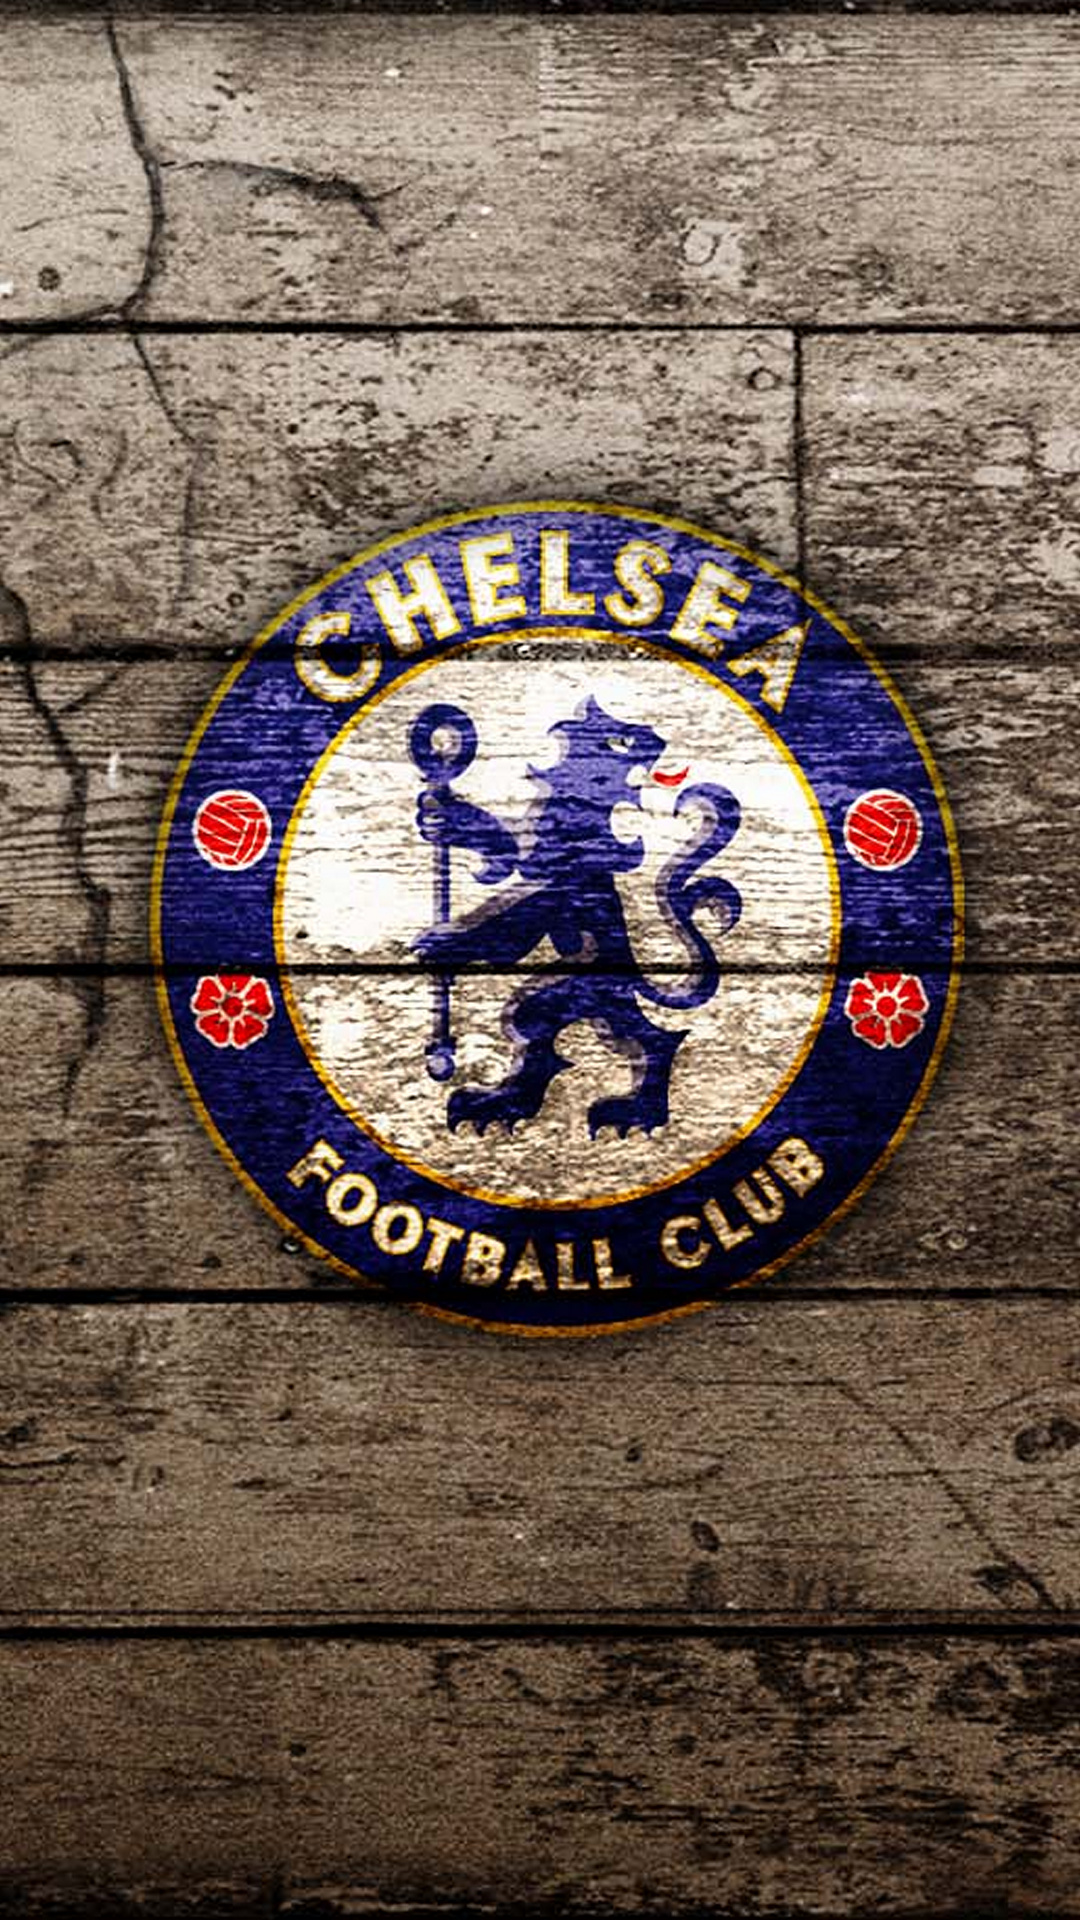 Chelsea: A new ownership including Todd Boehly and Clearlake Capital, 2022. 1080x1920 Full HD Wallpaper.